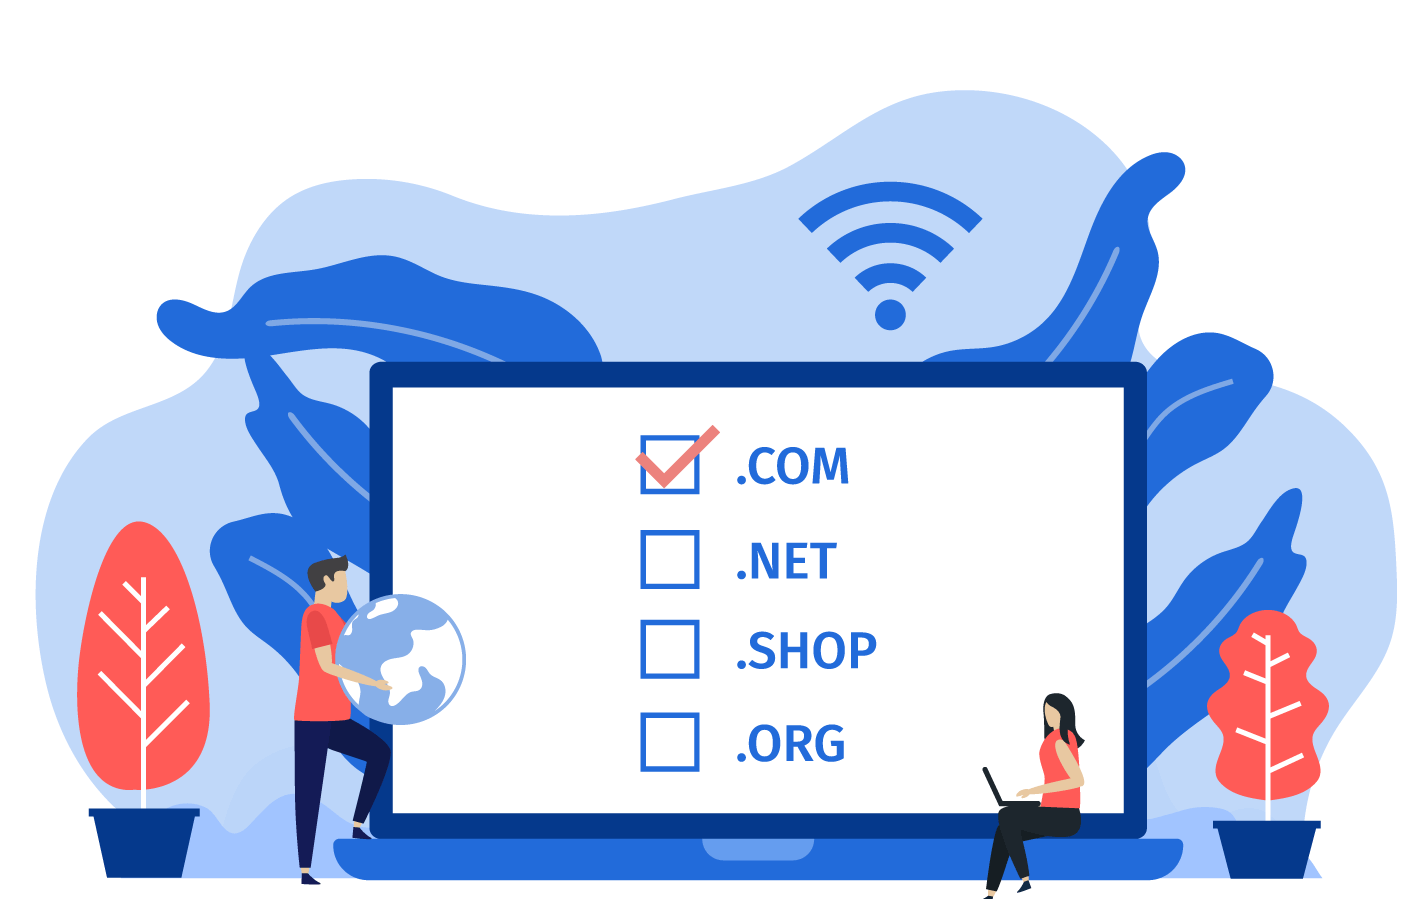 Outside of .COM, what other domain extensions are you investing in this year?